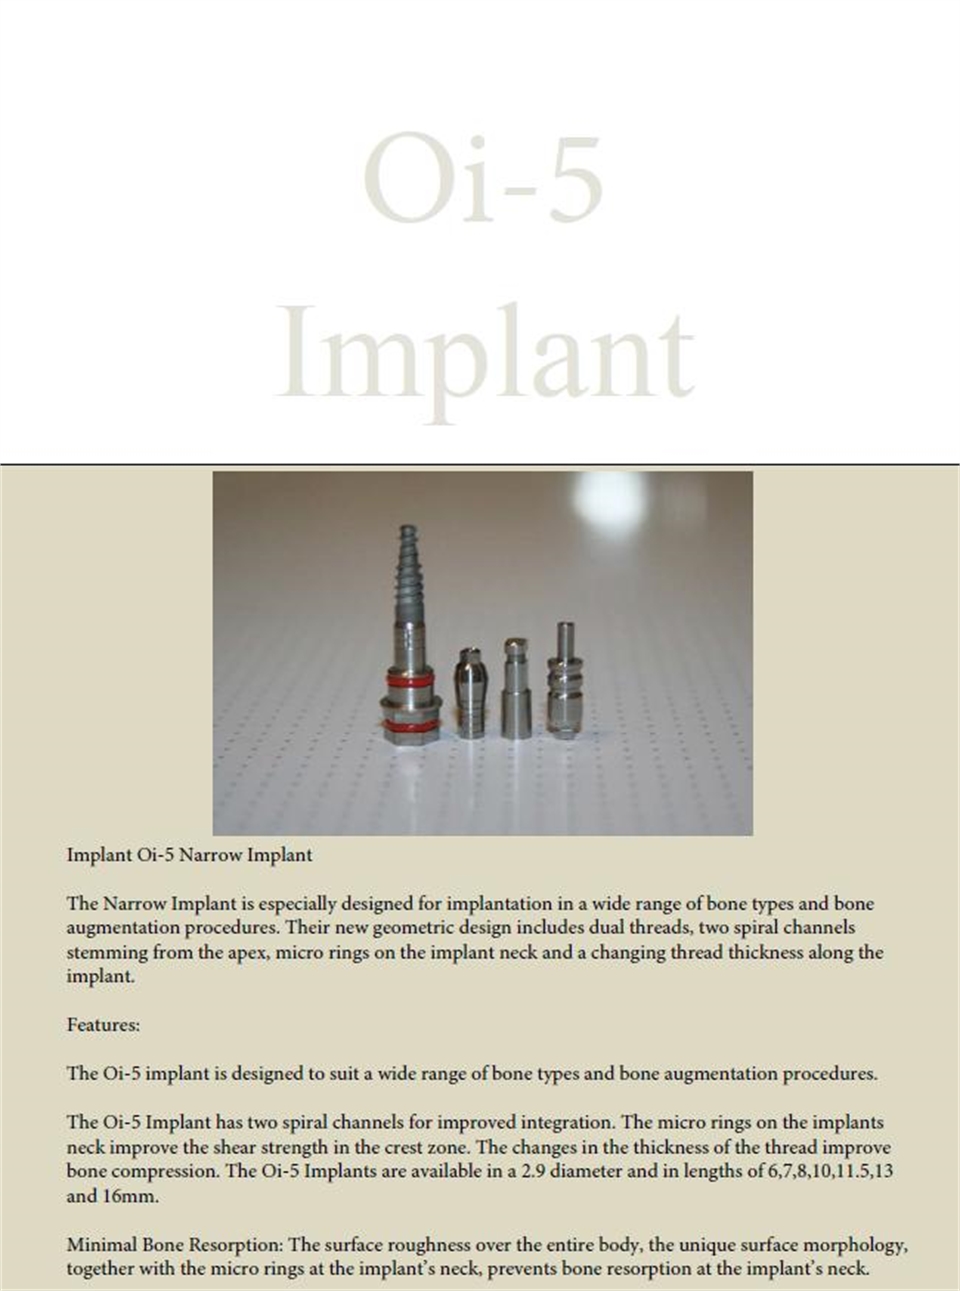 The Narrow Implant is especially designed for implantation in a wide range of bone types and bone augmentation procedures. 